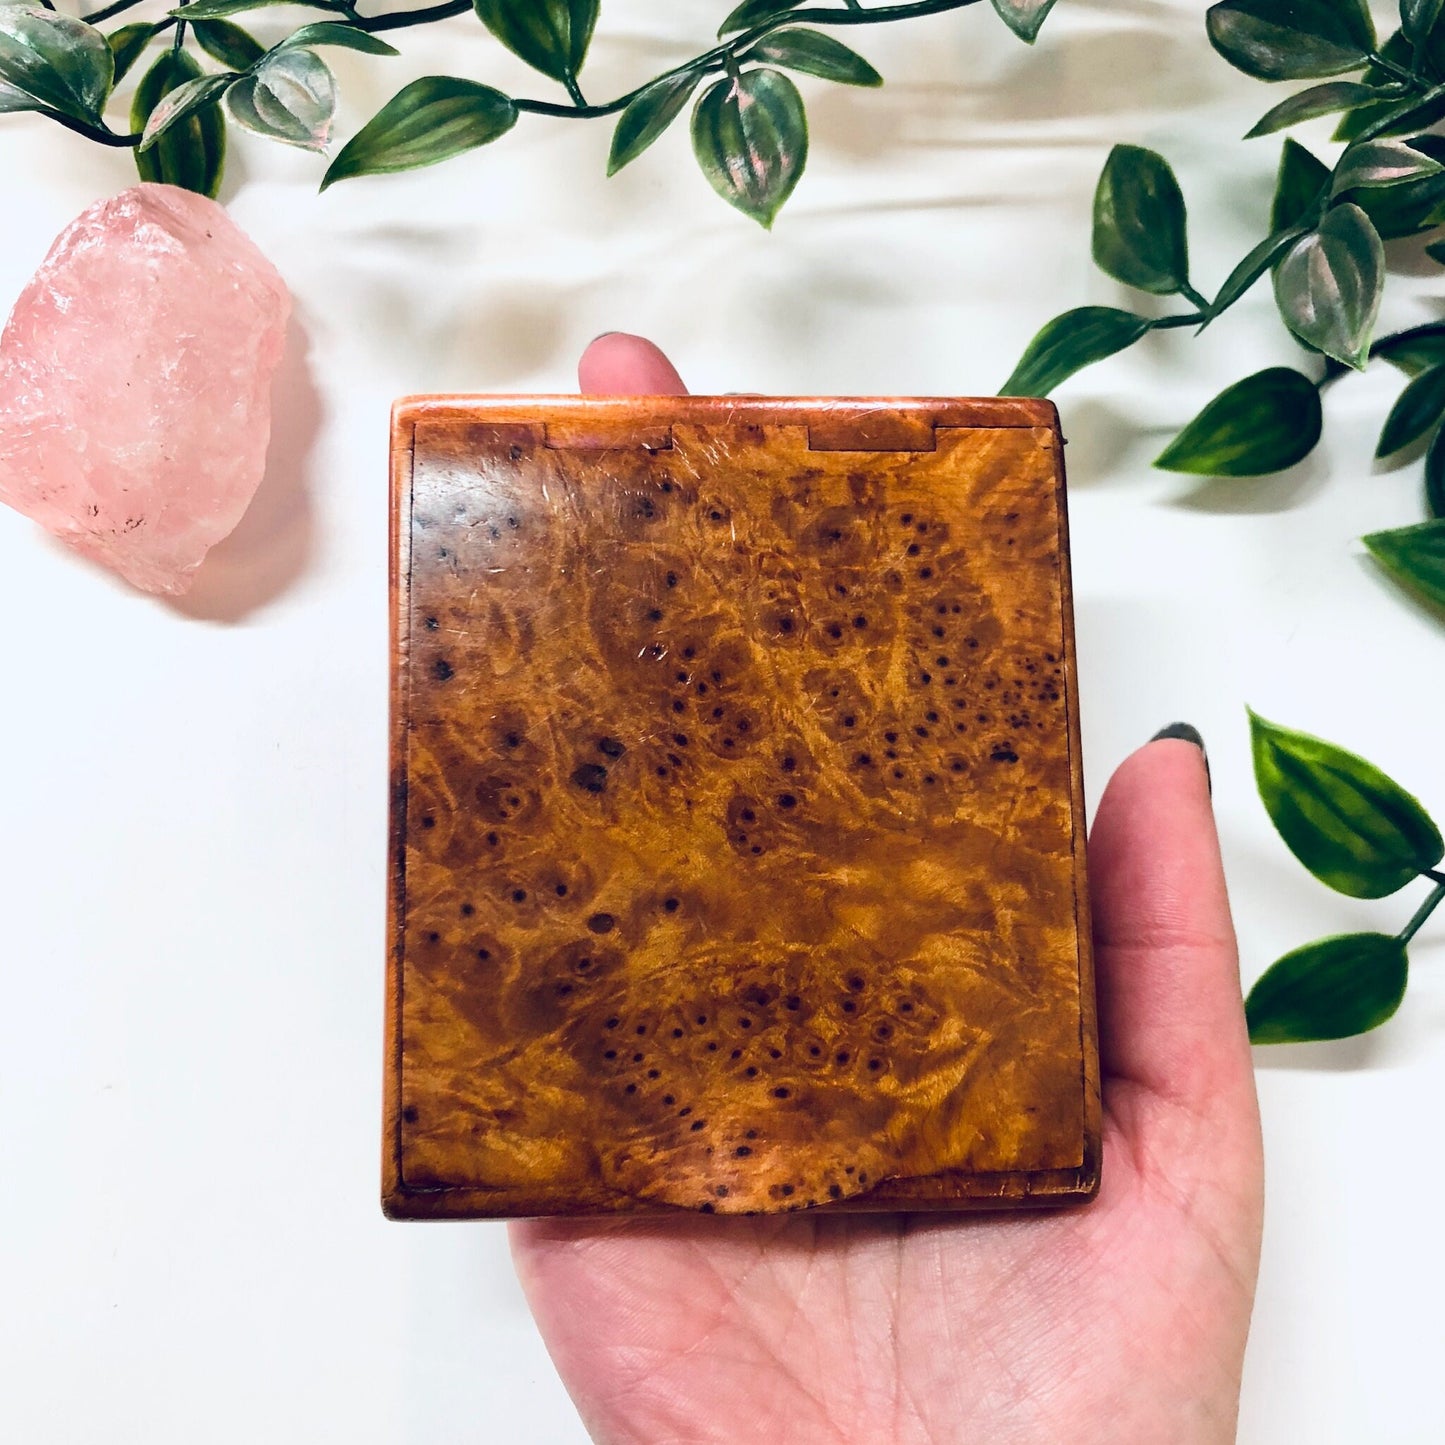 Vintage wooden hinged box with burl wood pattern held in hand with leaves in background, can be used as cigarette case or business card holder